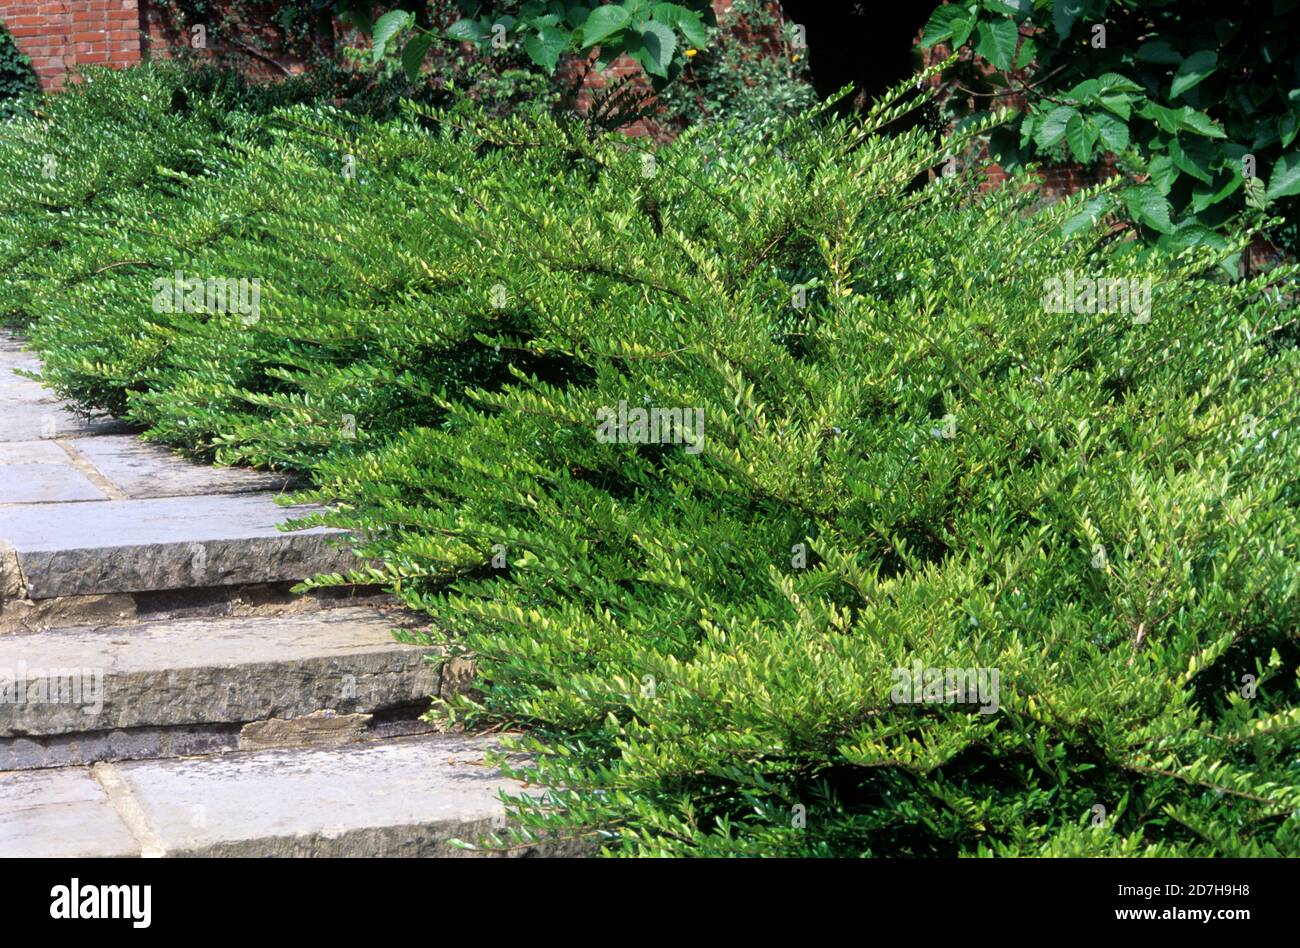 Box-leaved Honeysuckle (Lonicera pileata) at the edge of a stone staircase Stock Photo